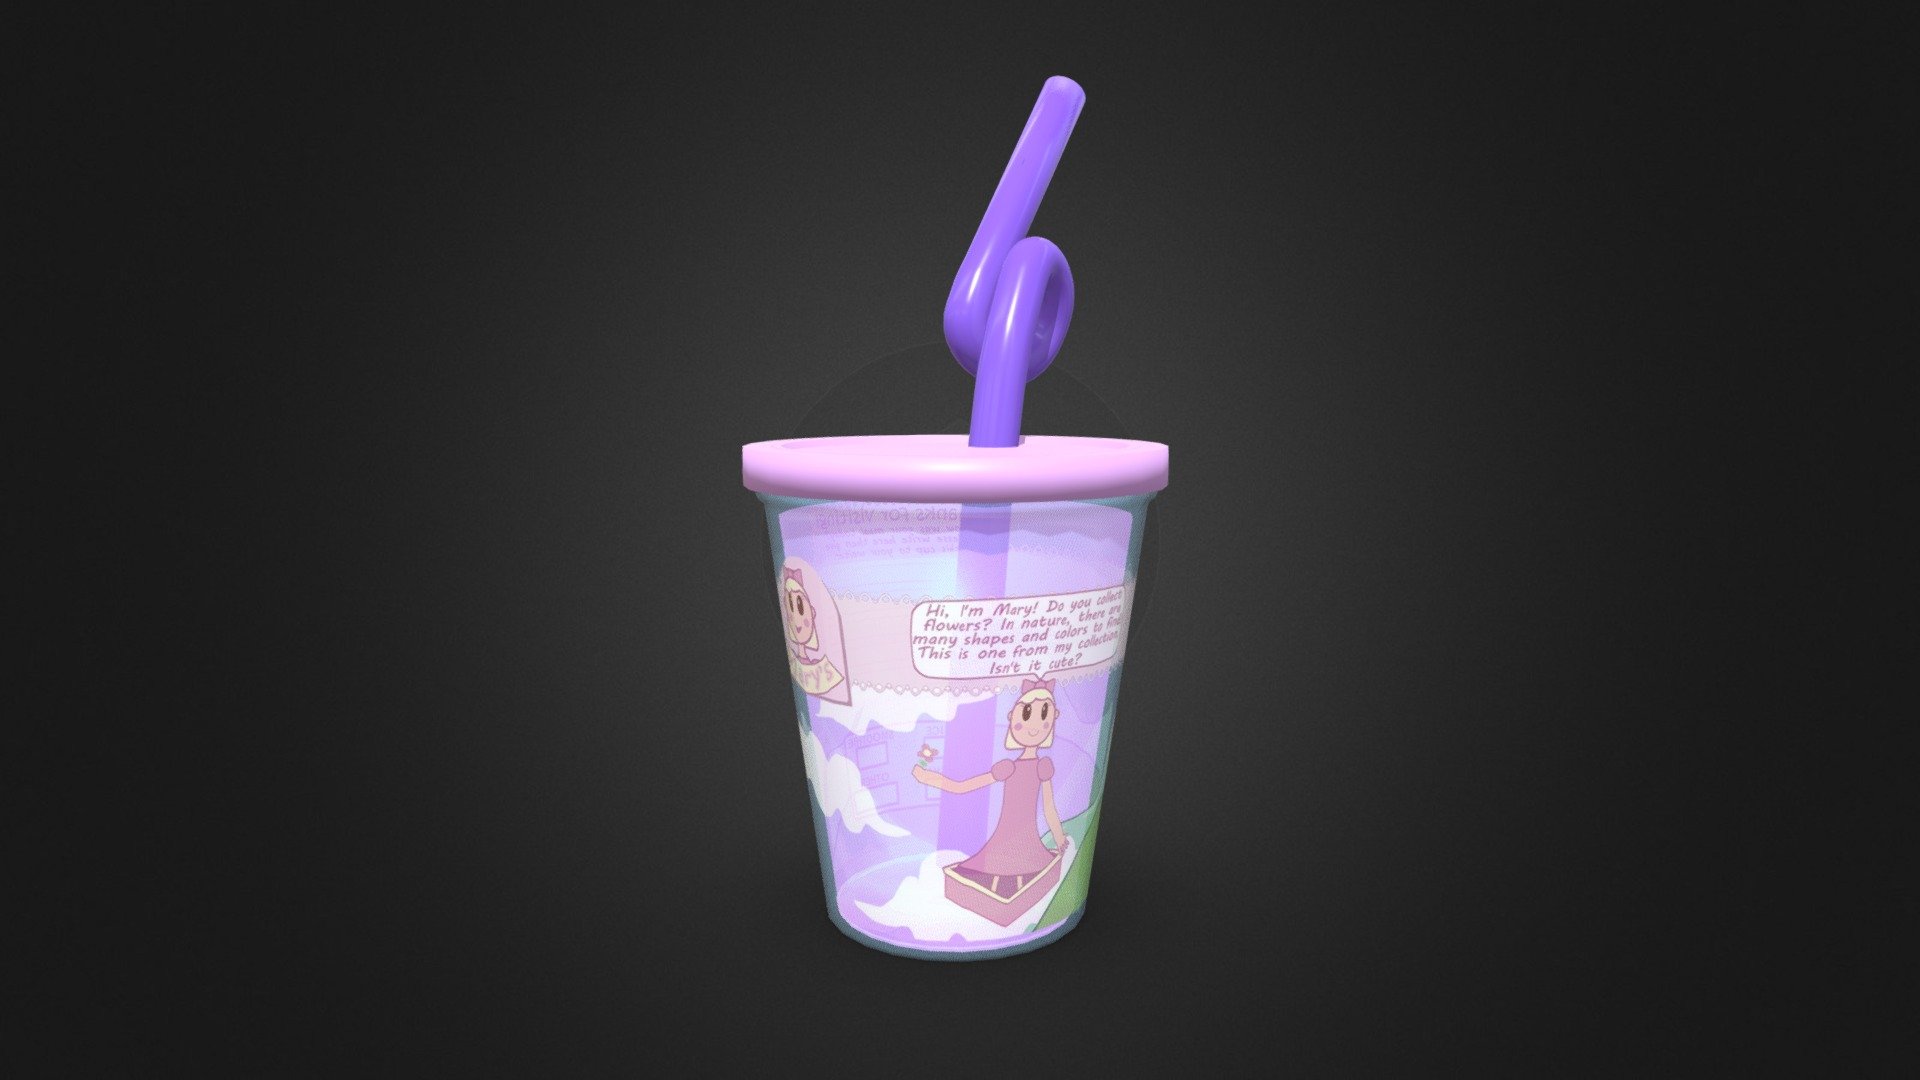 Like some real restaurants, Mary's has a special, smaller, and overall cuter cup meant for younger kids to drink from. As with real kid's cups, it has the plain but assumed-sturdy lid with an off-center, crazy straw that forms a loop before it reaches the user's mouth.

Though this is a 3D model meant for Project Magical Mary (Roblox), this is the higher-quality, original version; The version used in the experience has simplified geometry around the cup's curves, and the straw is more jagged.

Like in real life, you'll be able to get this cup regardless of your character's age, but it will be less effective if you're not a kid or toddler 3d model